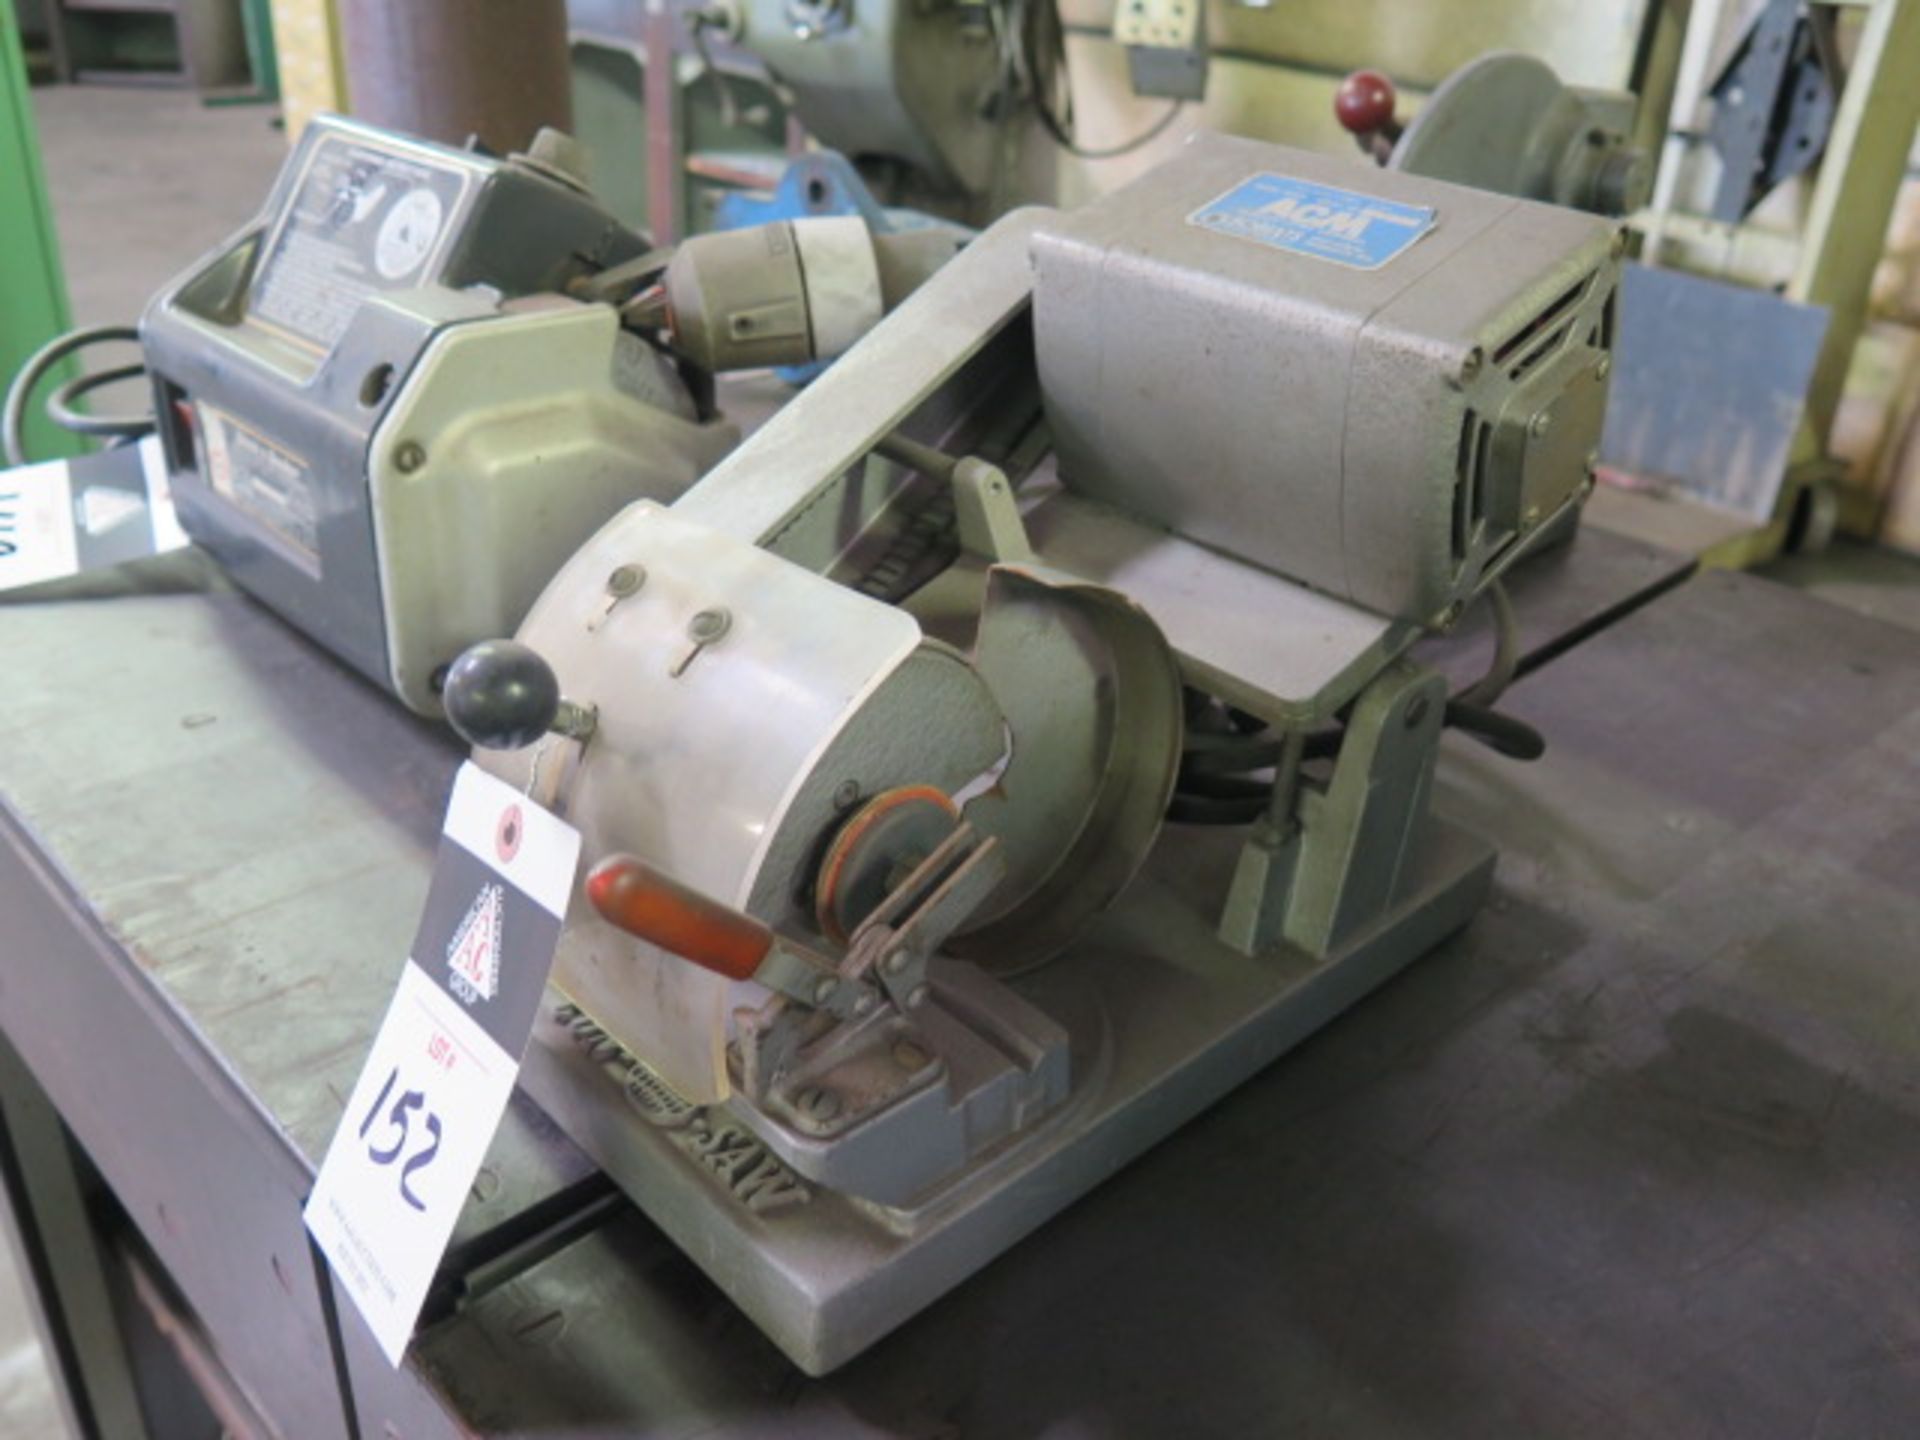 Roberts mdl. ACM-4 Micro-Cutoff Saw (SOLD AS-IS - NO WARRANTY) - Image 2 of 5